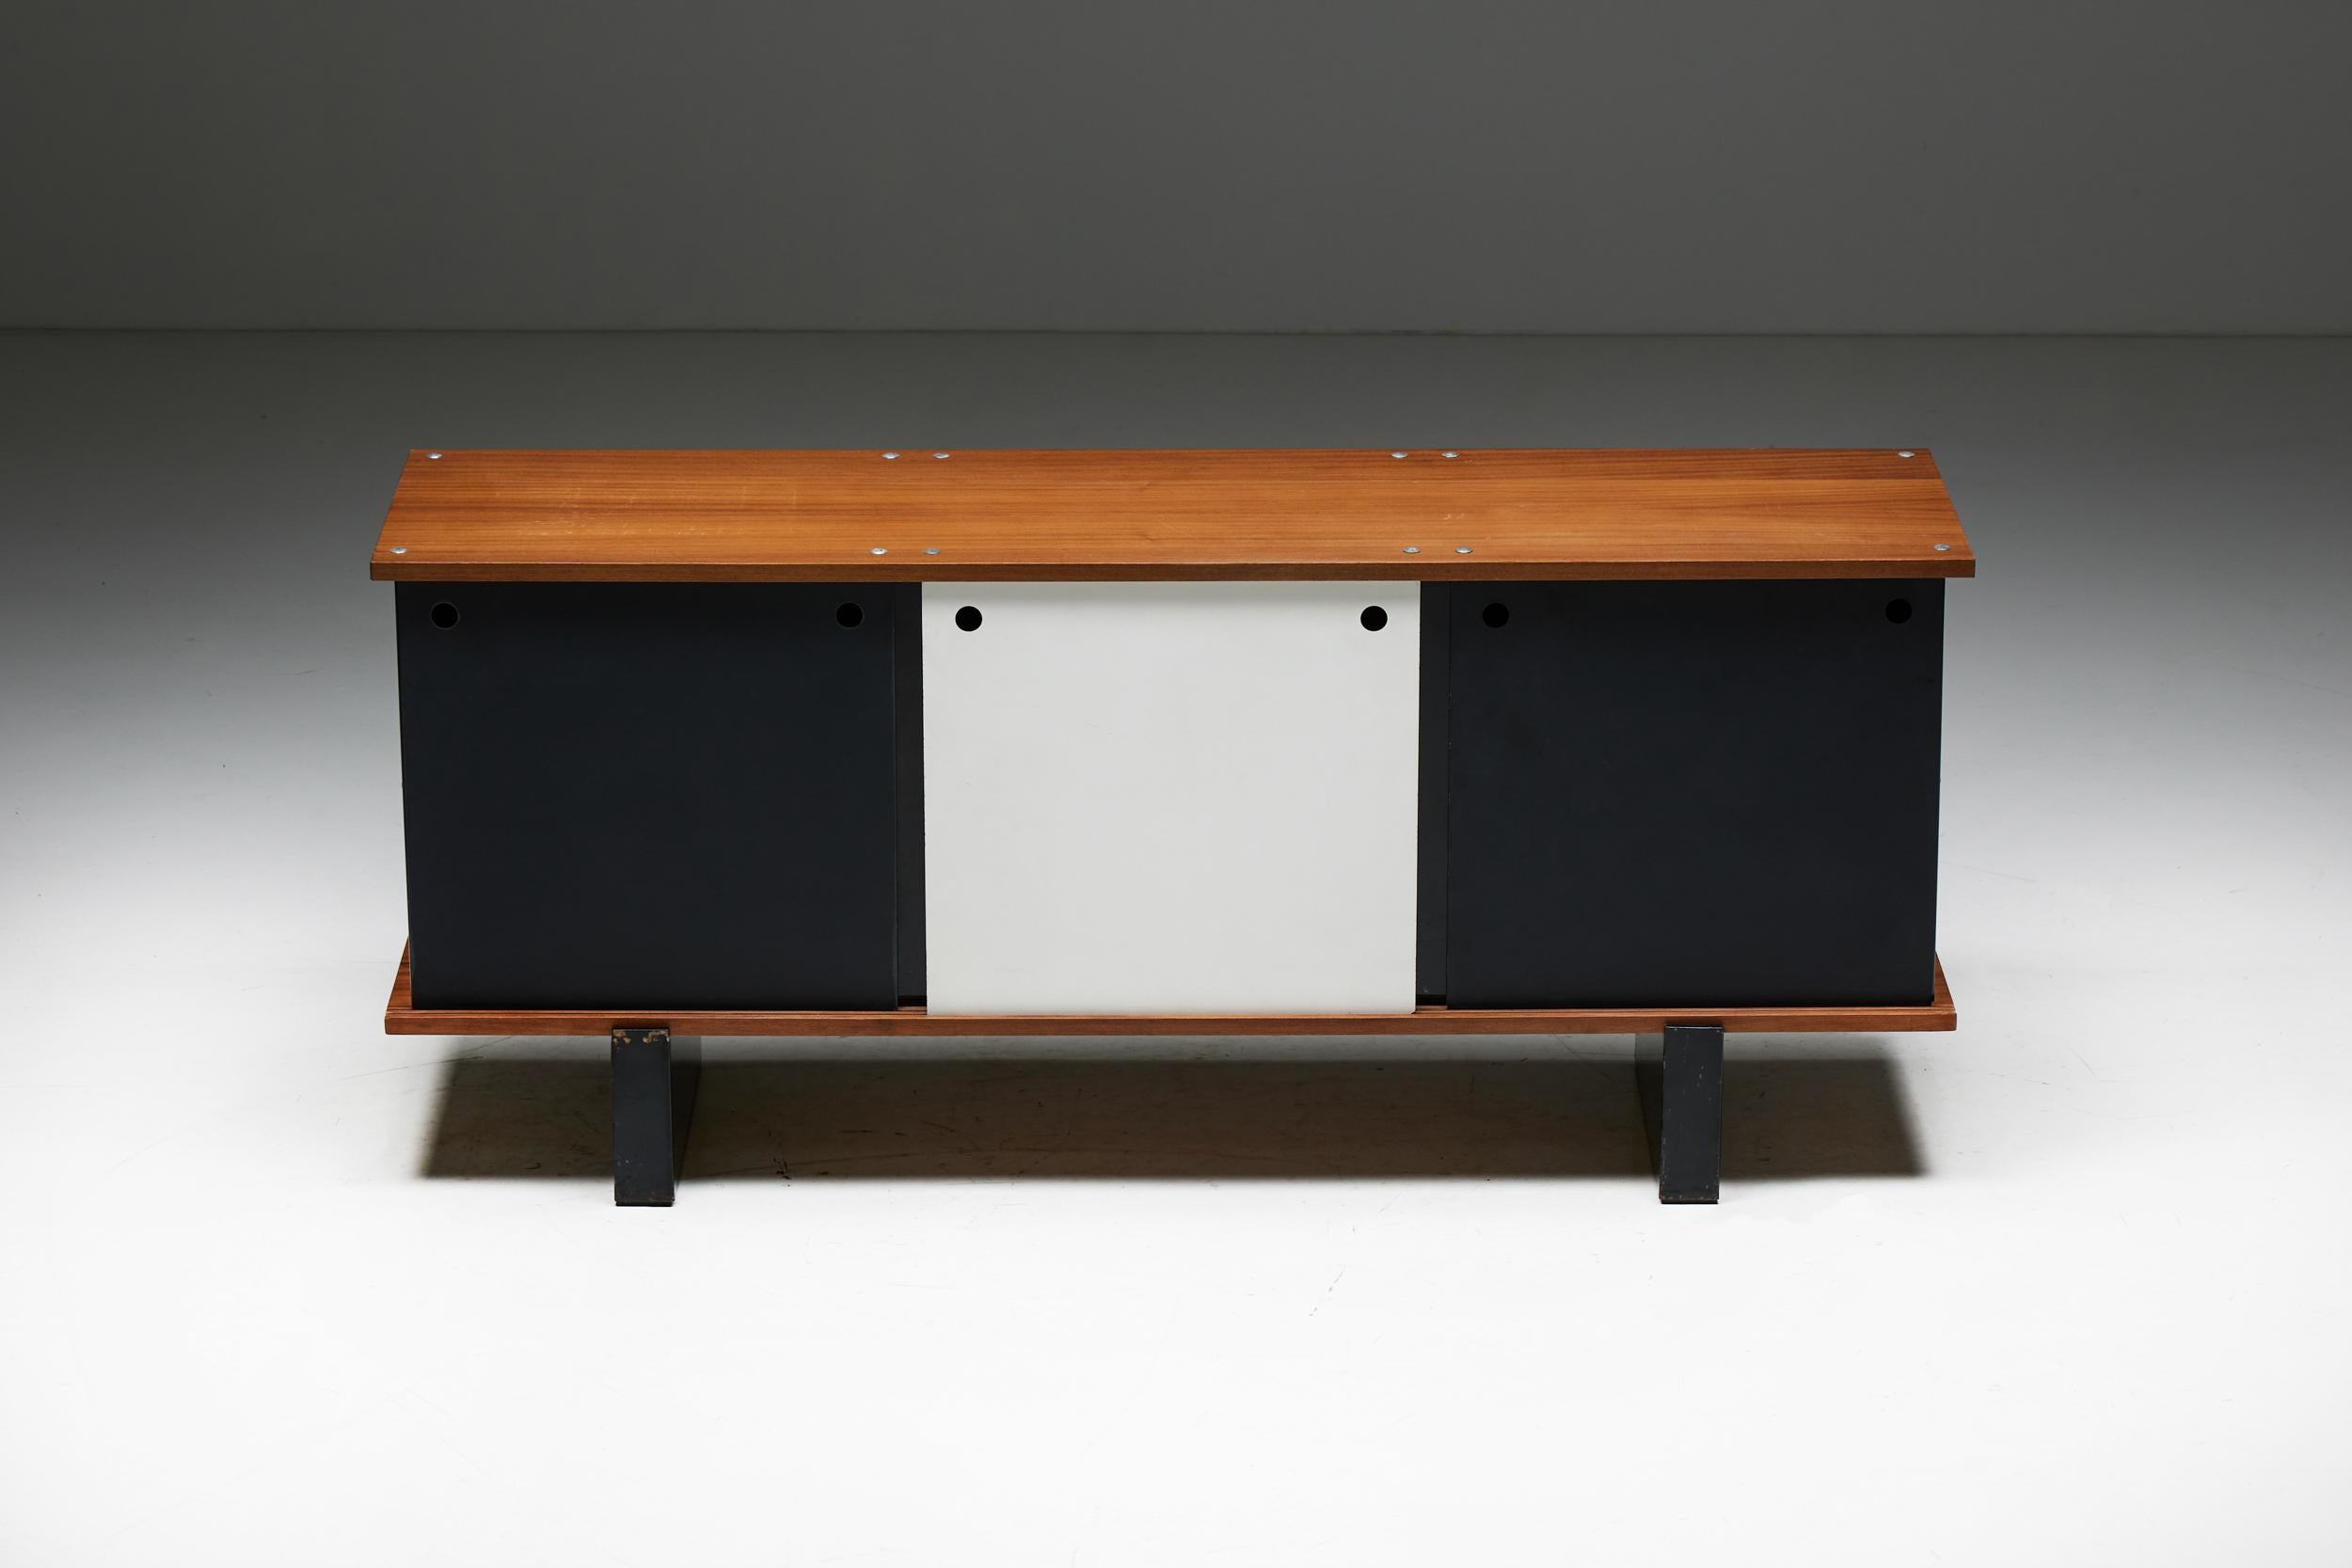 Modernism; Midcentury Modern; Simplicity; Charlotte Perriand; Cité Cansado; 1958; 1950s; France; Modernist Design; 1960s;

Sideboard 'bloc' by Charlotte Perriand, a timeless piece designed for the mining town of Cansado in Mauritania. Composed of